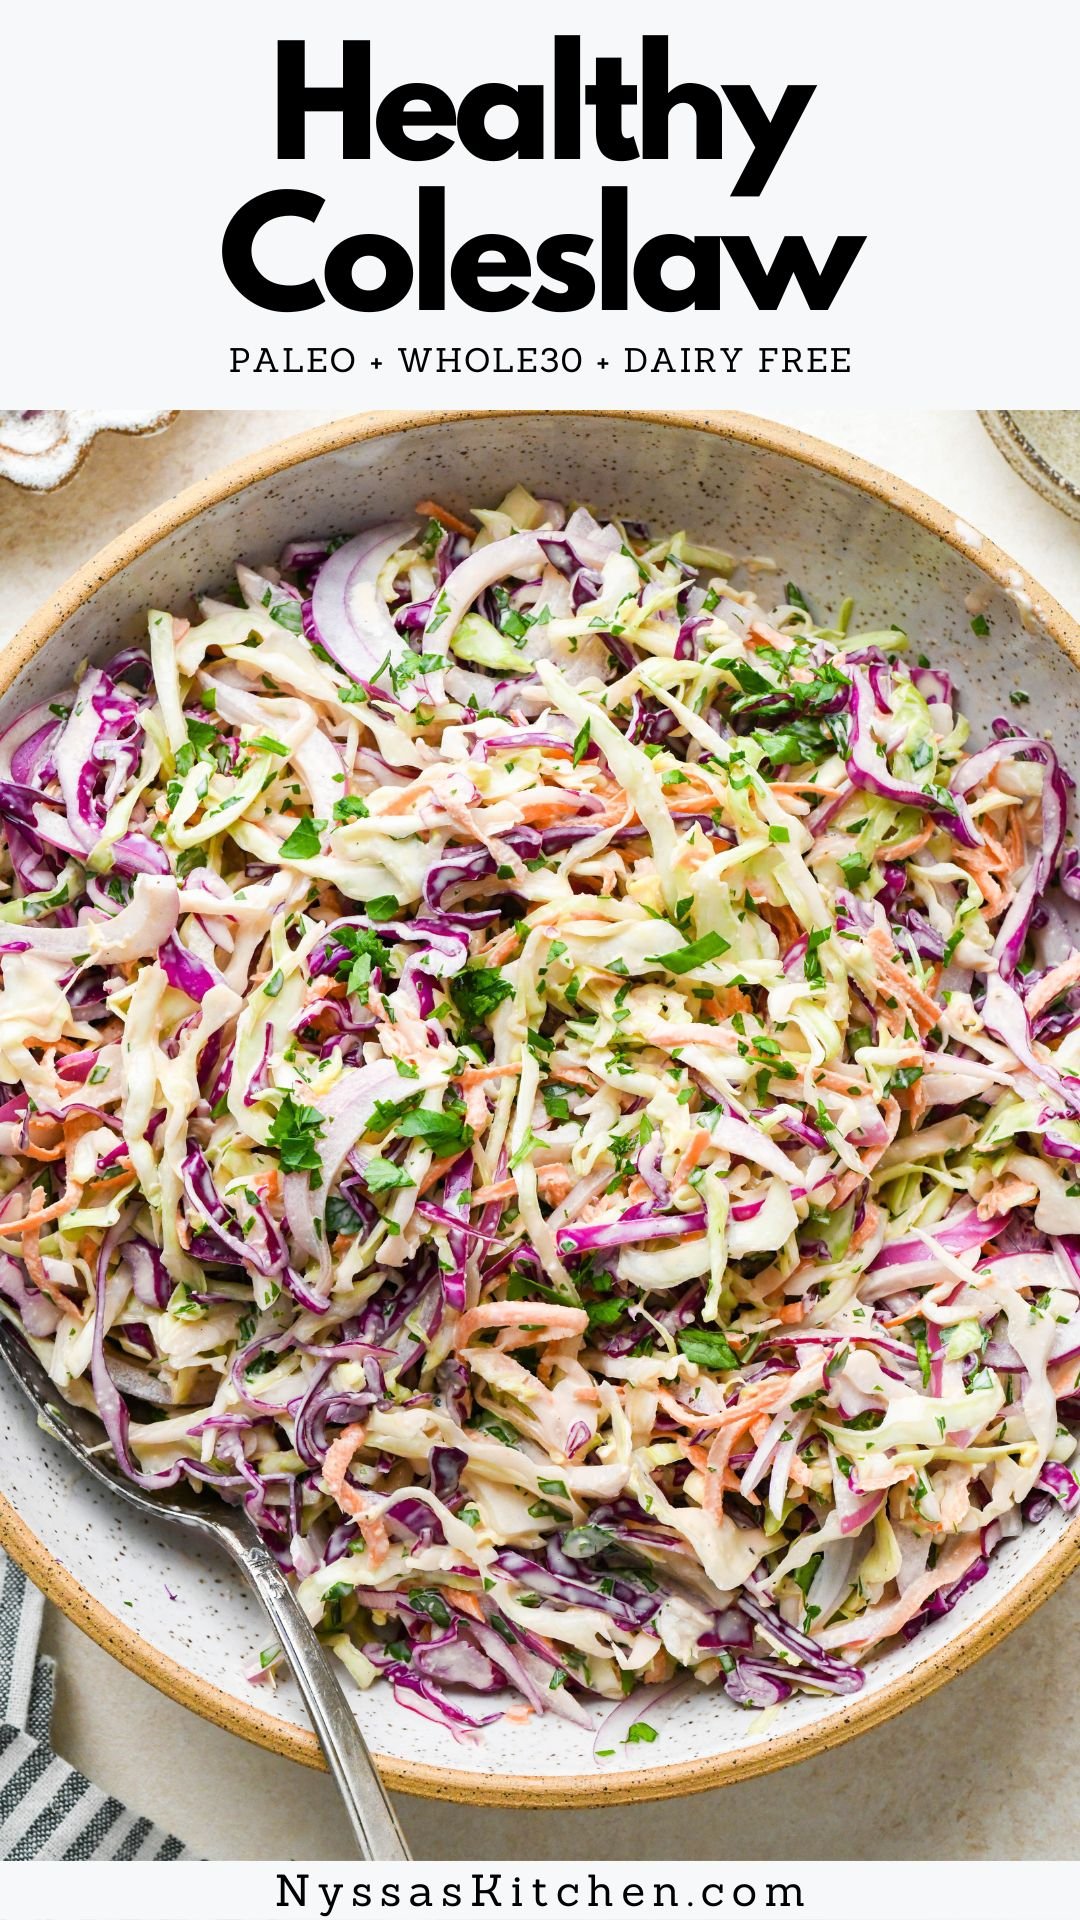 This Whole30 coleslaw is made with fresh and crunchy cabbage, carrots, herbs, and a creamy, tangy dressing. All the flavors you love in a traditional coleslaw recipe without any of the sugar! The perfect side dish for your next BBQ, potluck, or family dinner. Whole30, paleo, gluten free, dairy free, vegan option.